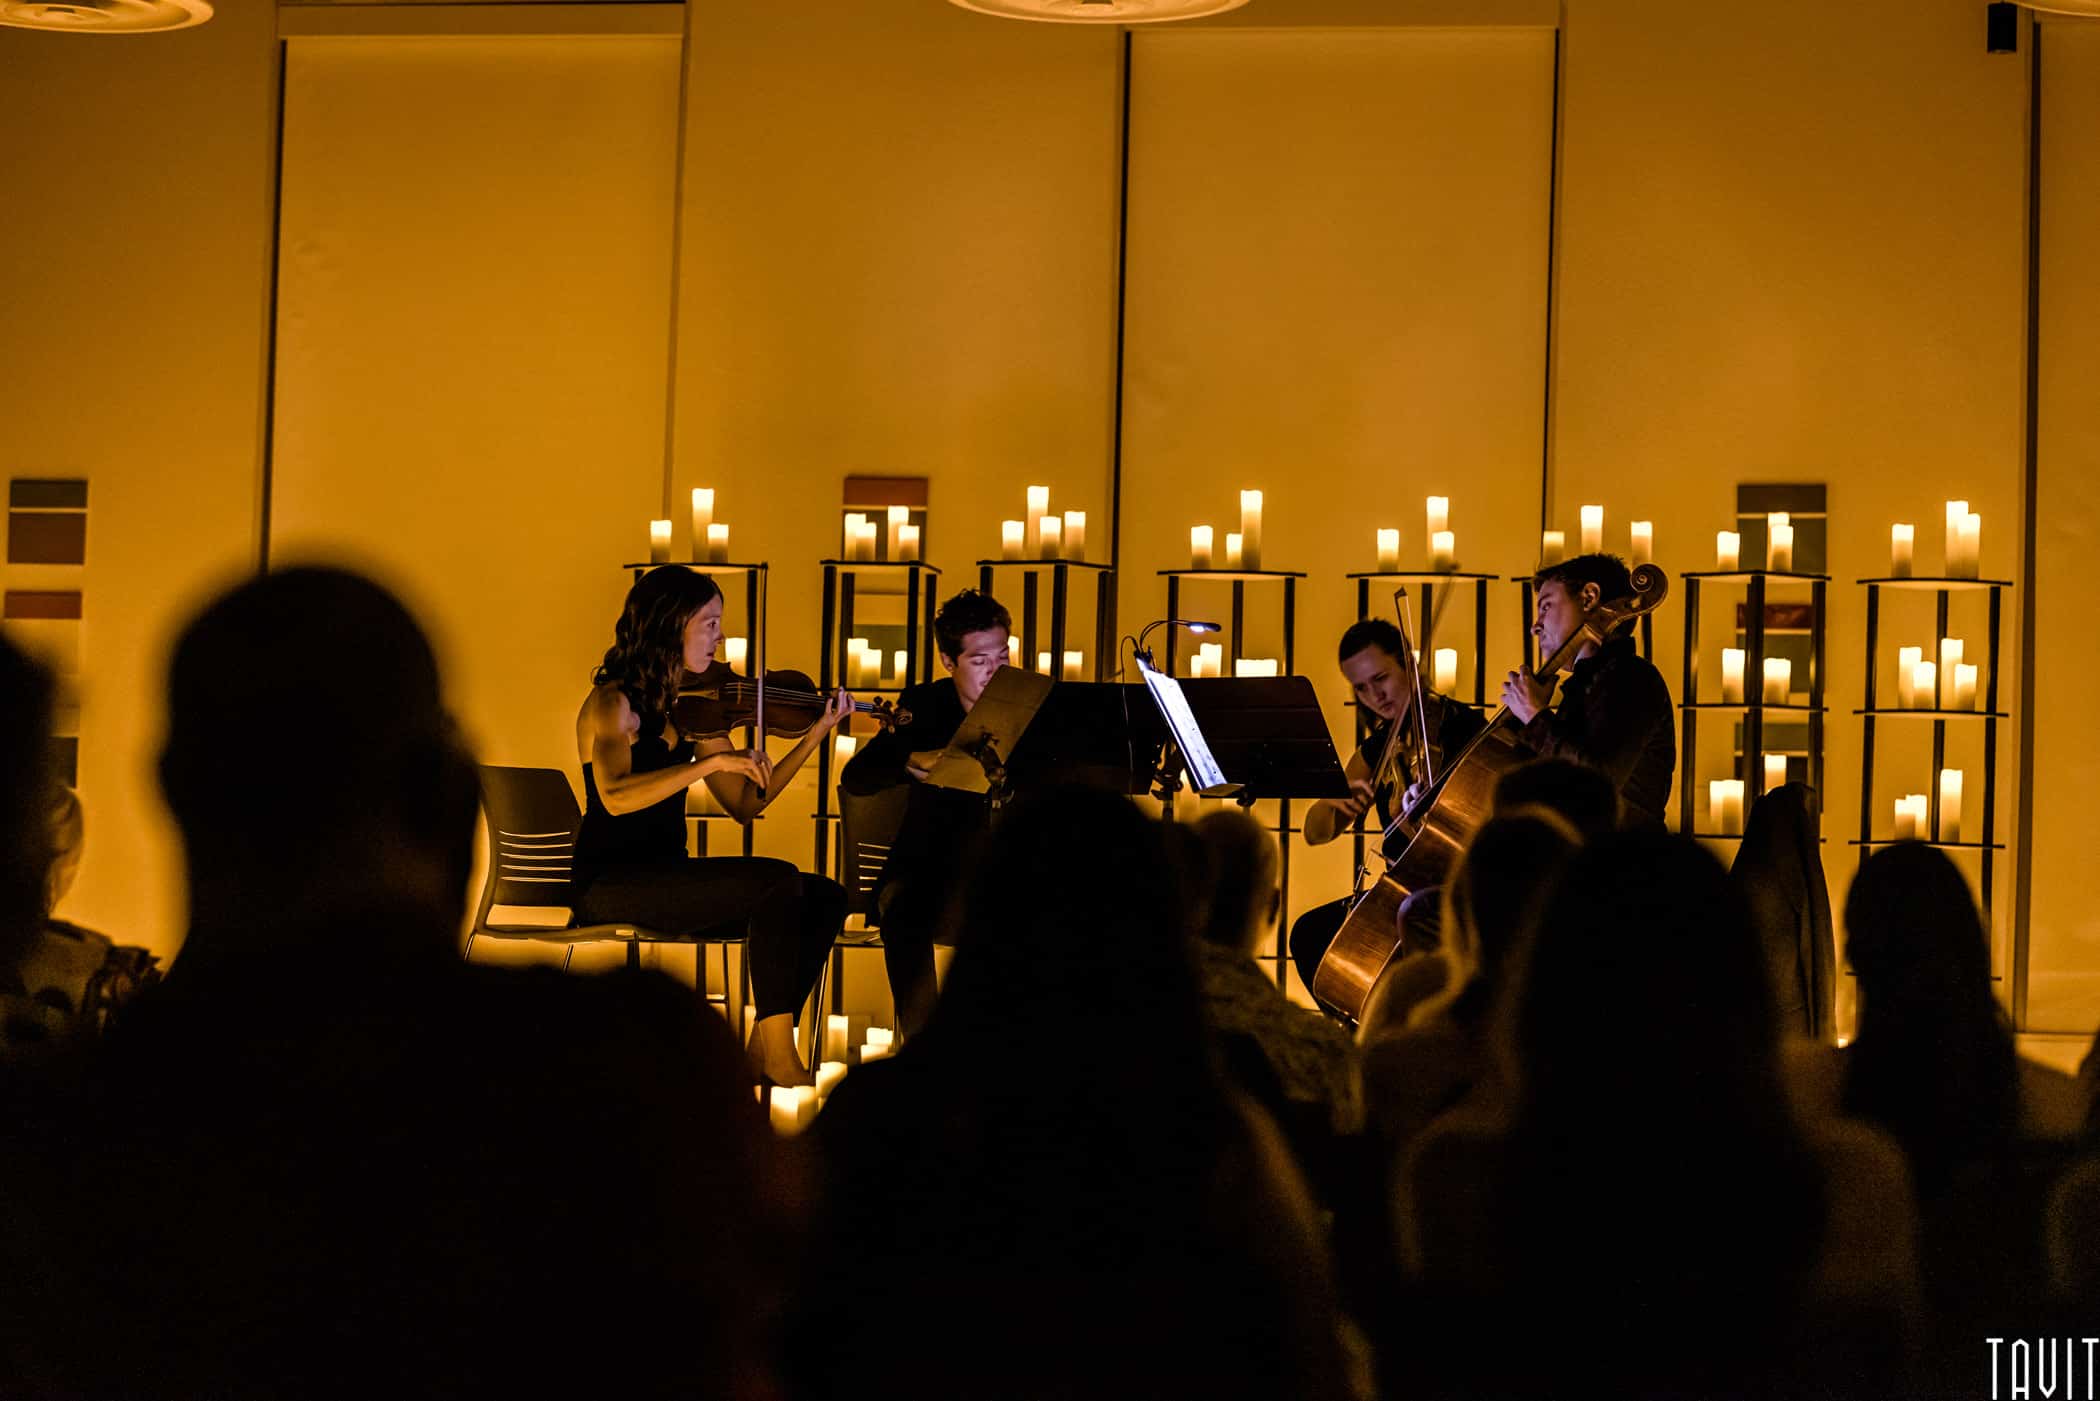 String quartet playing surrounded by candles